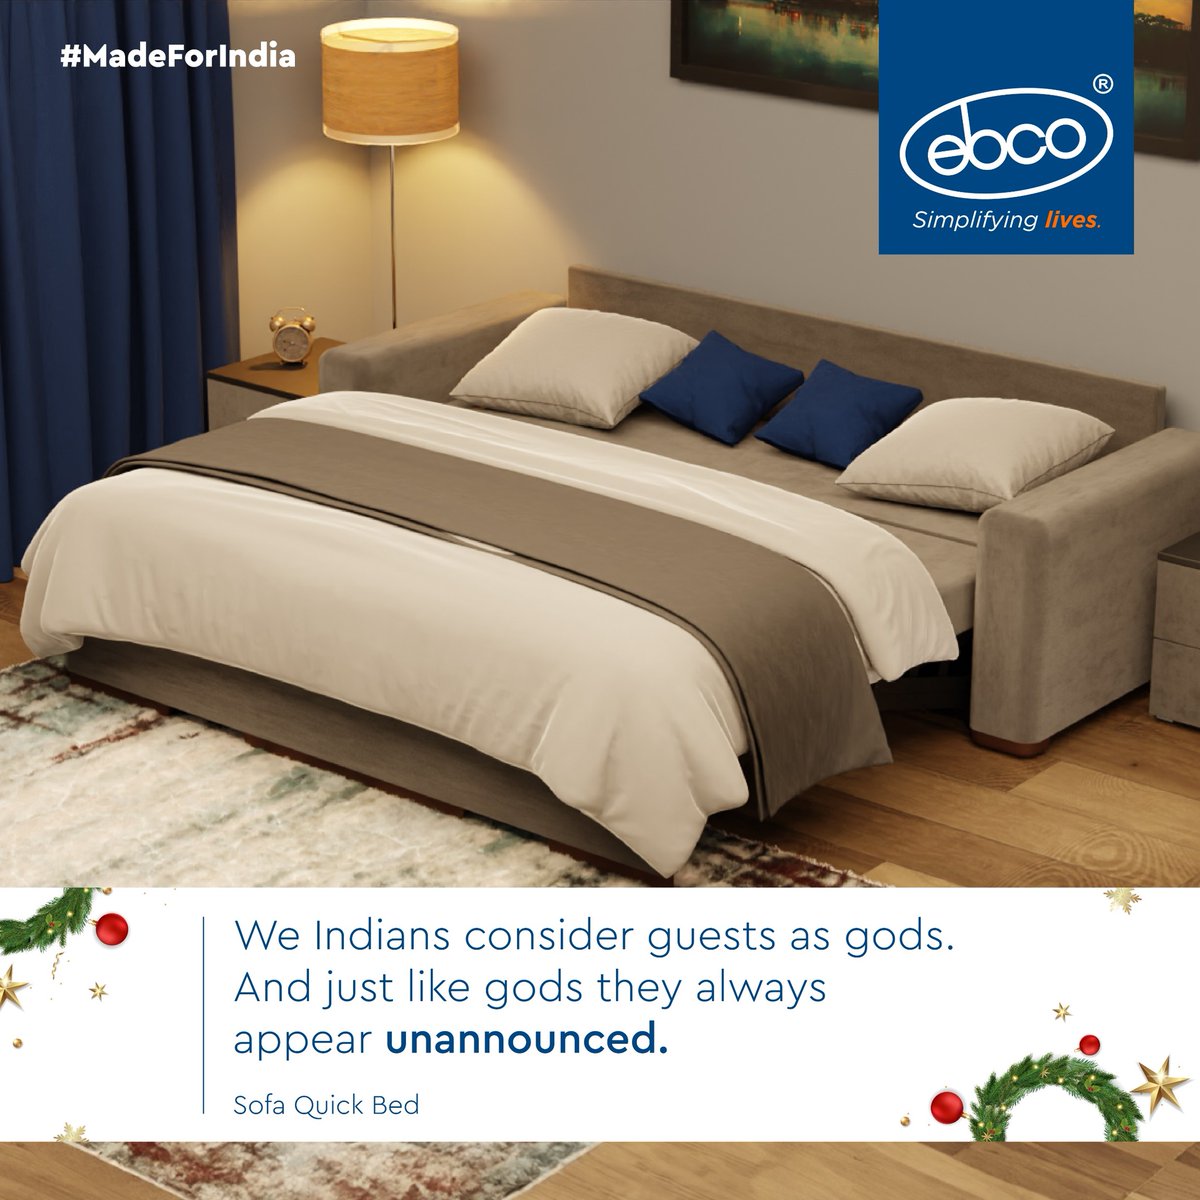 Presenting our latest campaign for our client Ebco where we focus on solving unique Indian problems with Ebco's innovative solutions. 
#MadeForIndia #SofaQuickBed #Compactroom #furniturefittings #advertising #digitaladvertising